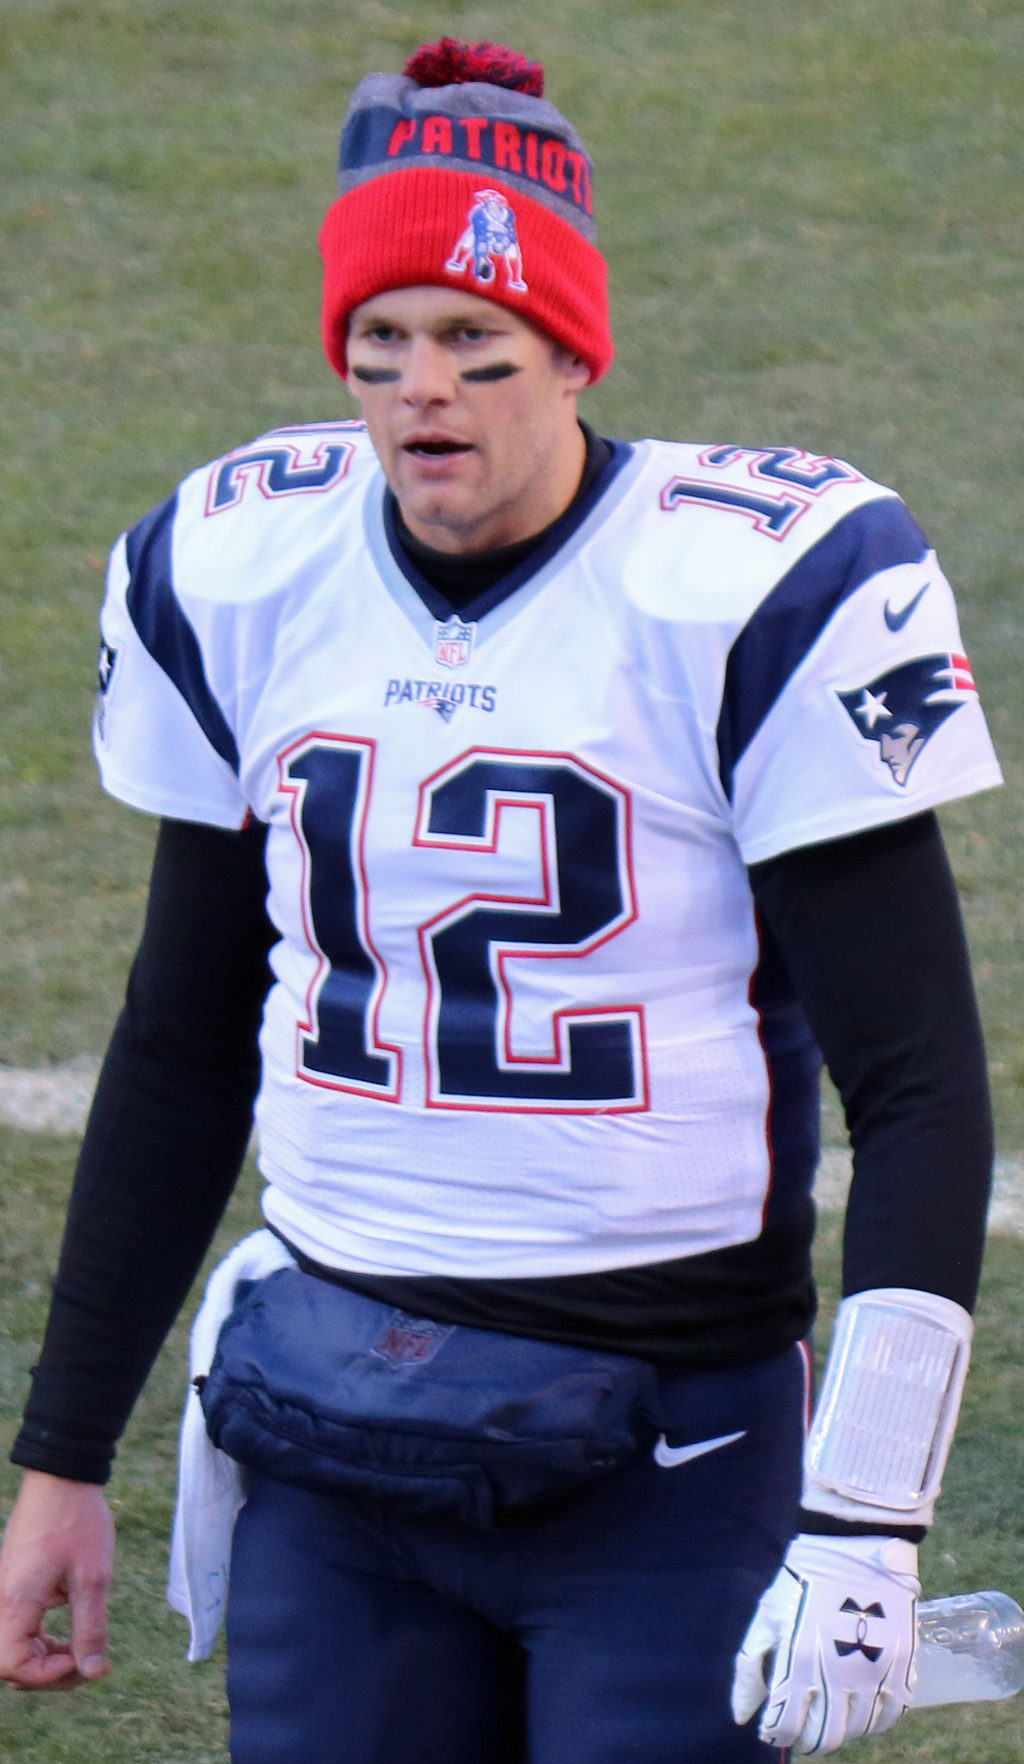 tom-brady-agrees-to-be-lead-nfl-analyst-at-fox-sports-after-playing-career